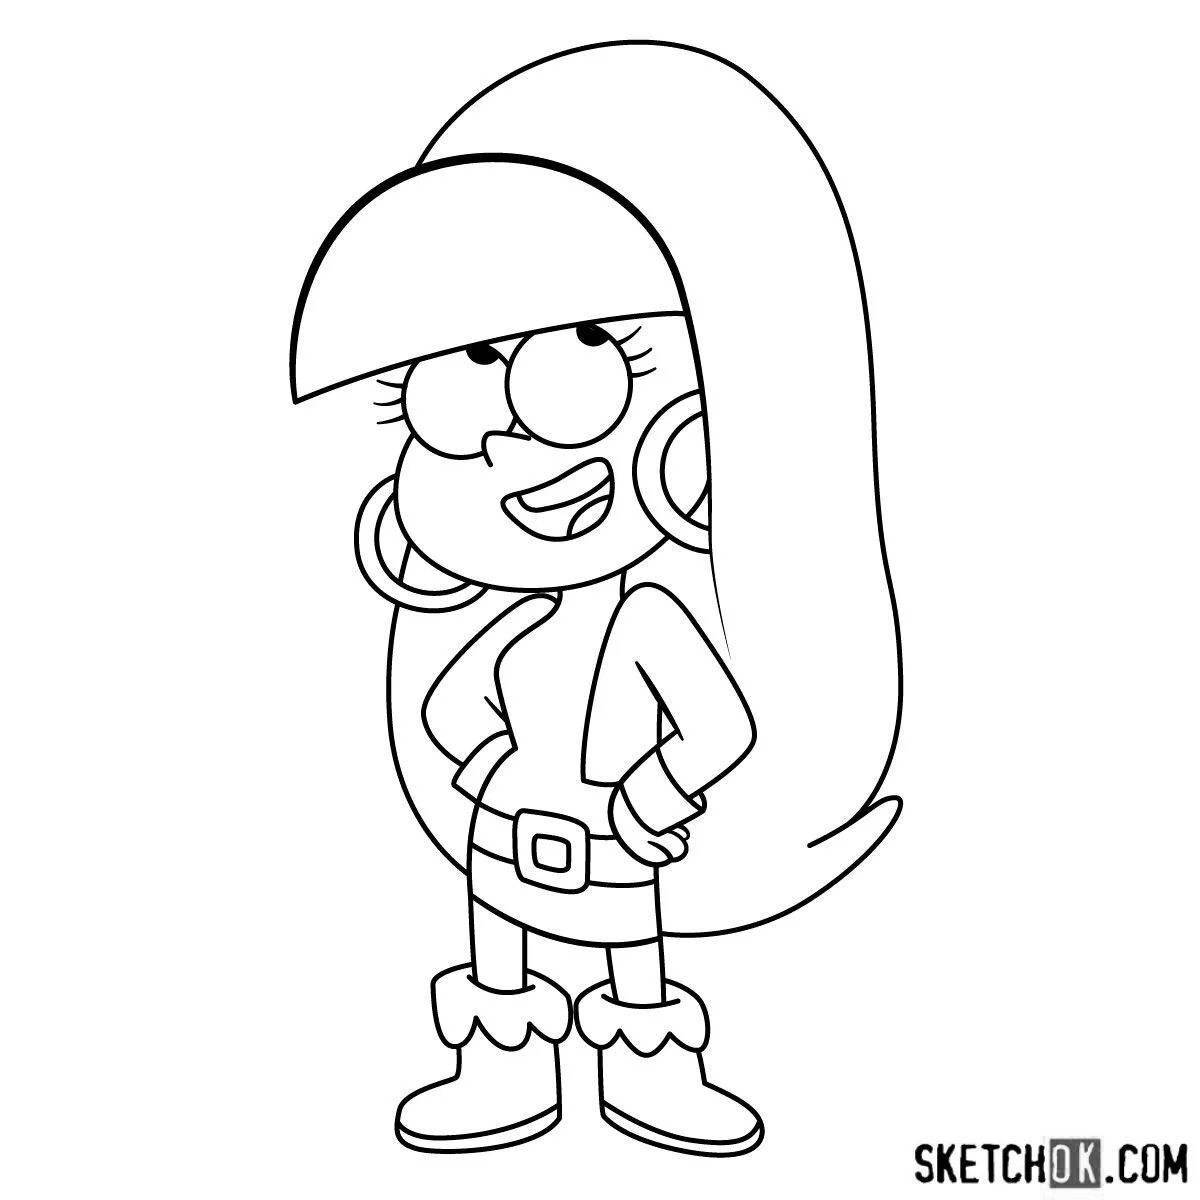 Colorful pacifica coloring page